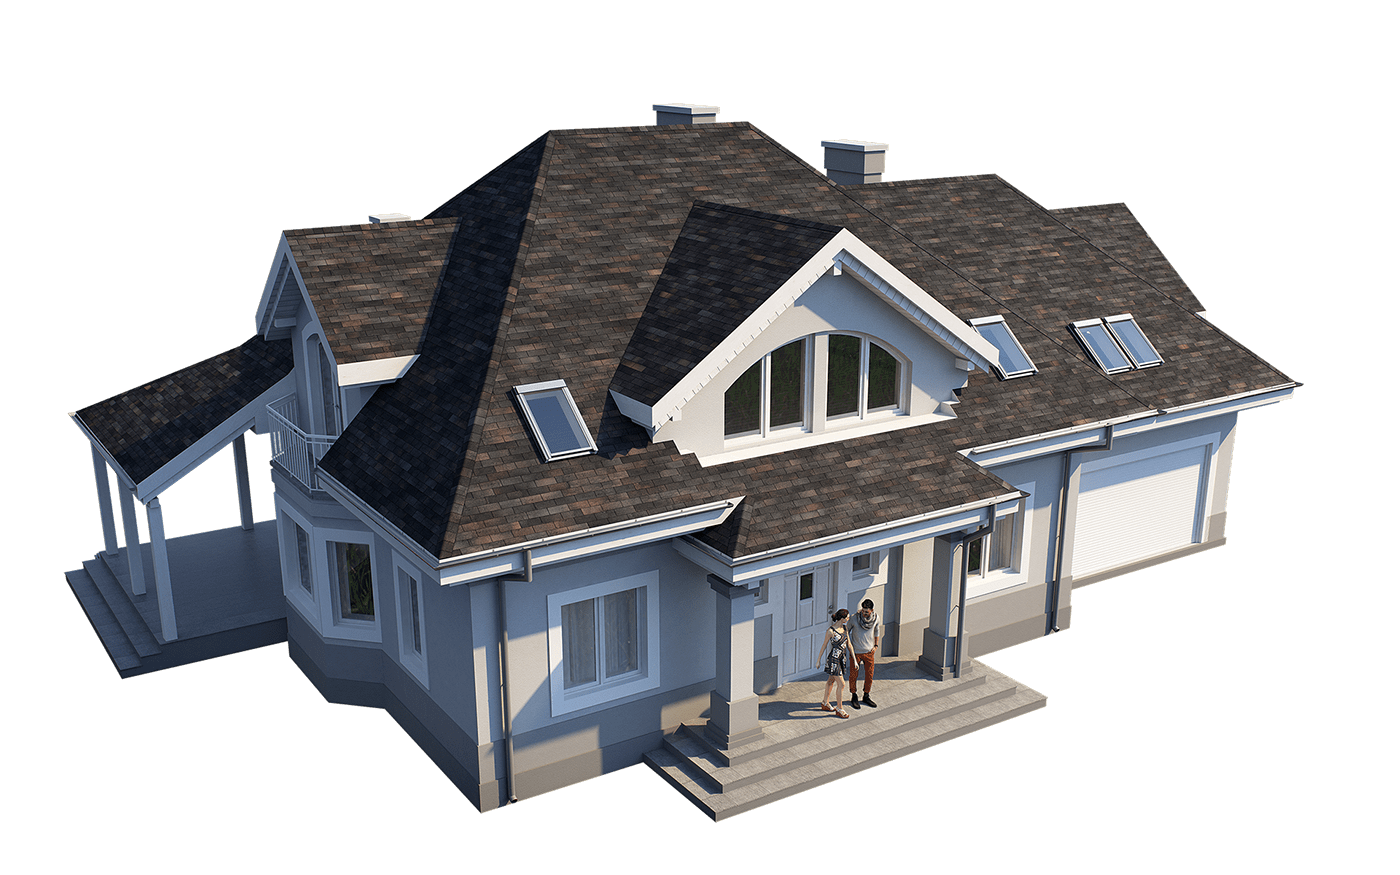 roof shingles 3-Tab asphalt railclone house architecture materials roofing 3dsmax